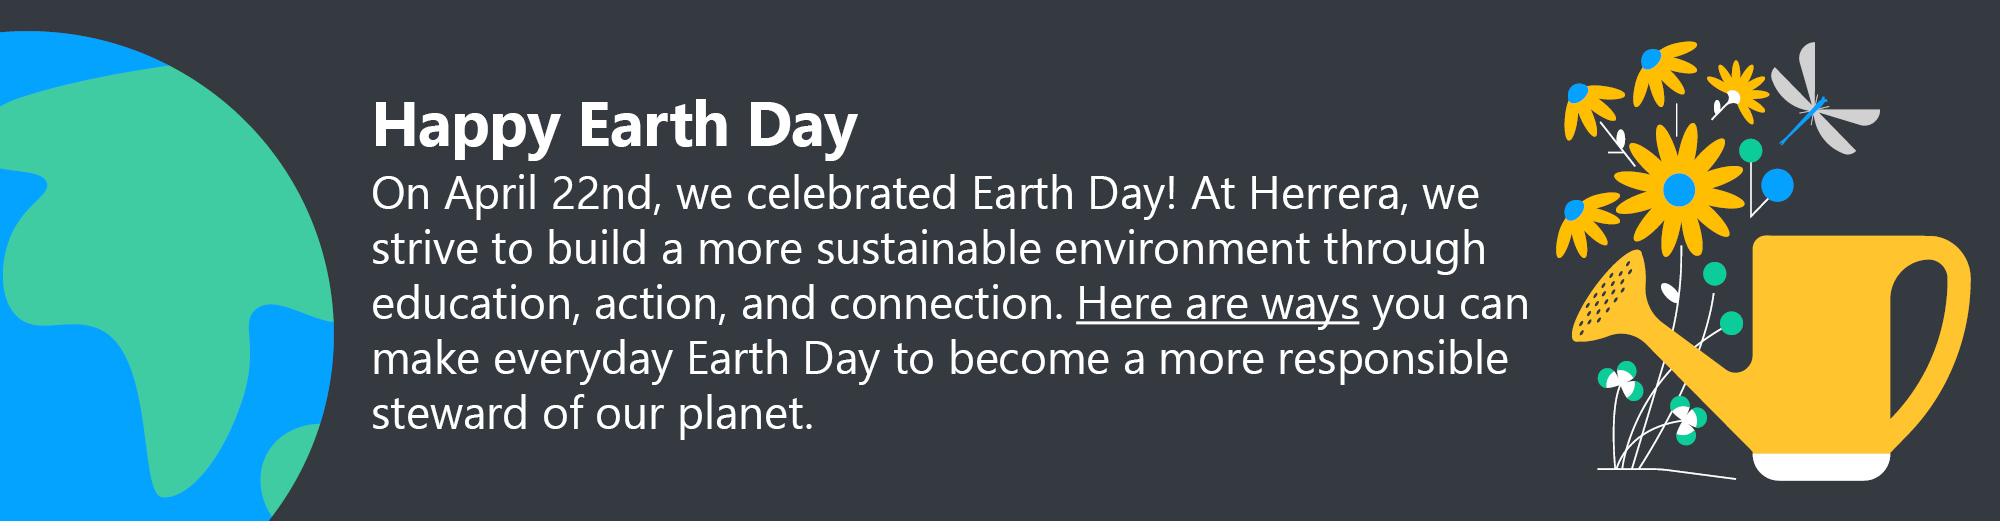 Q2-earth-day